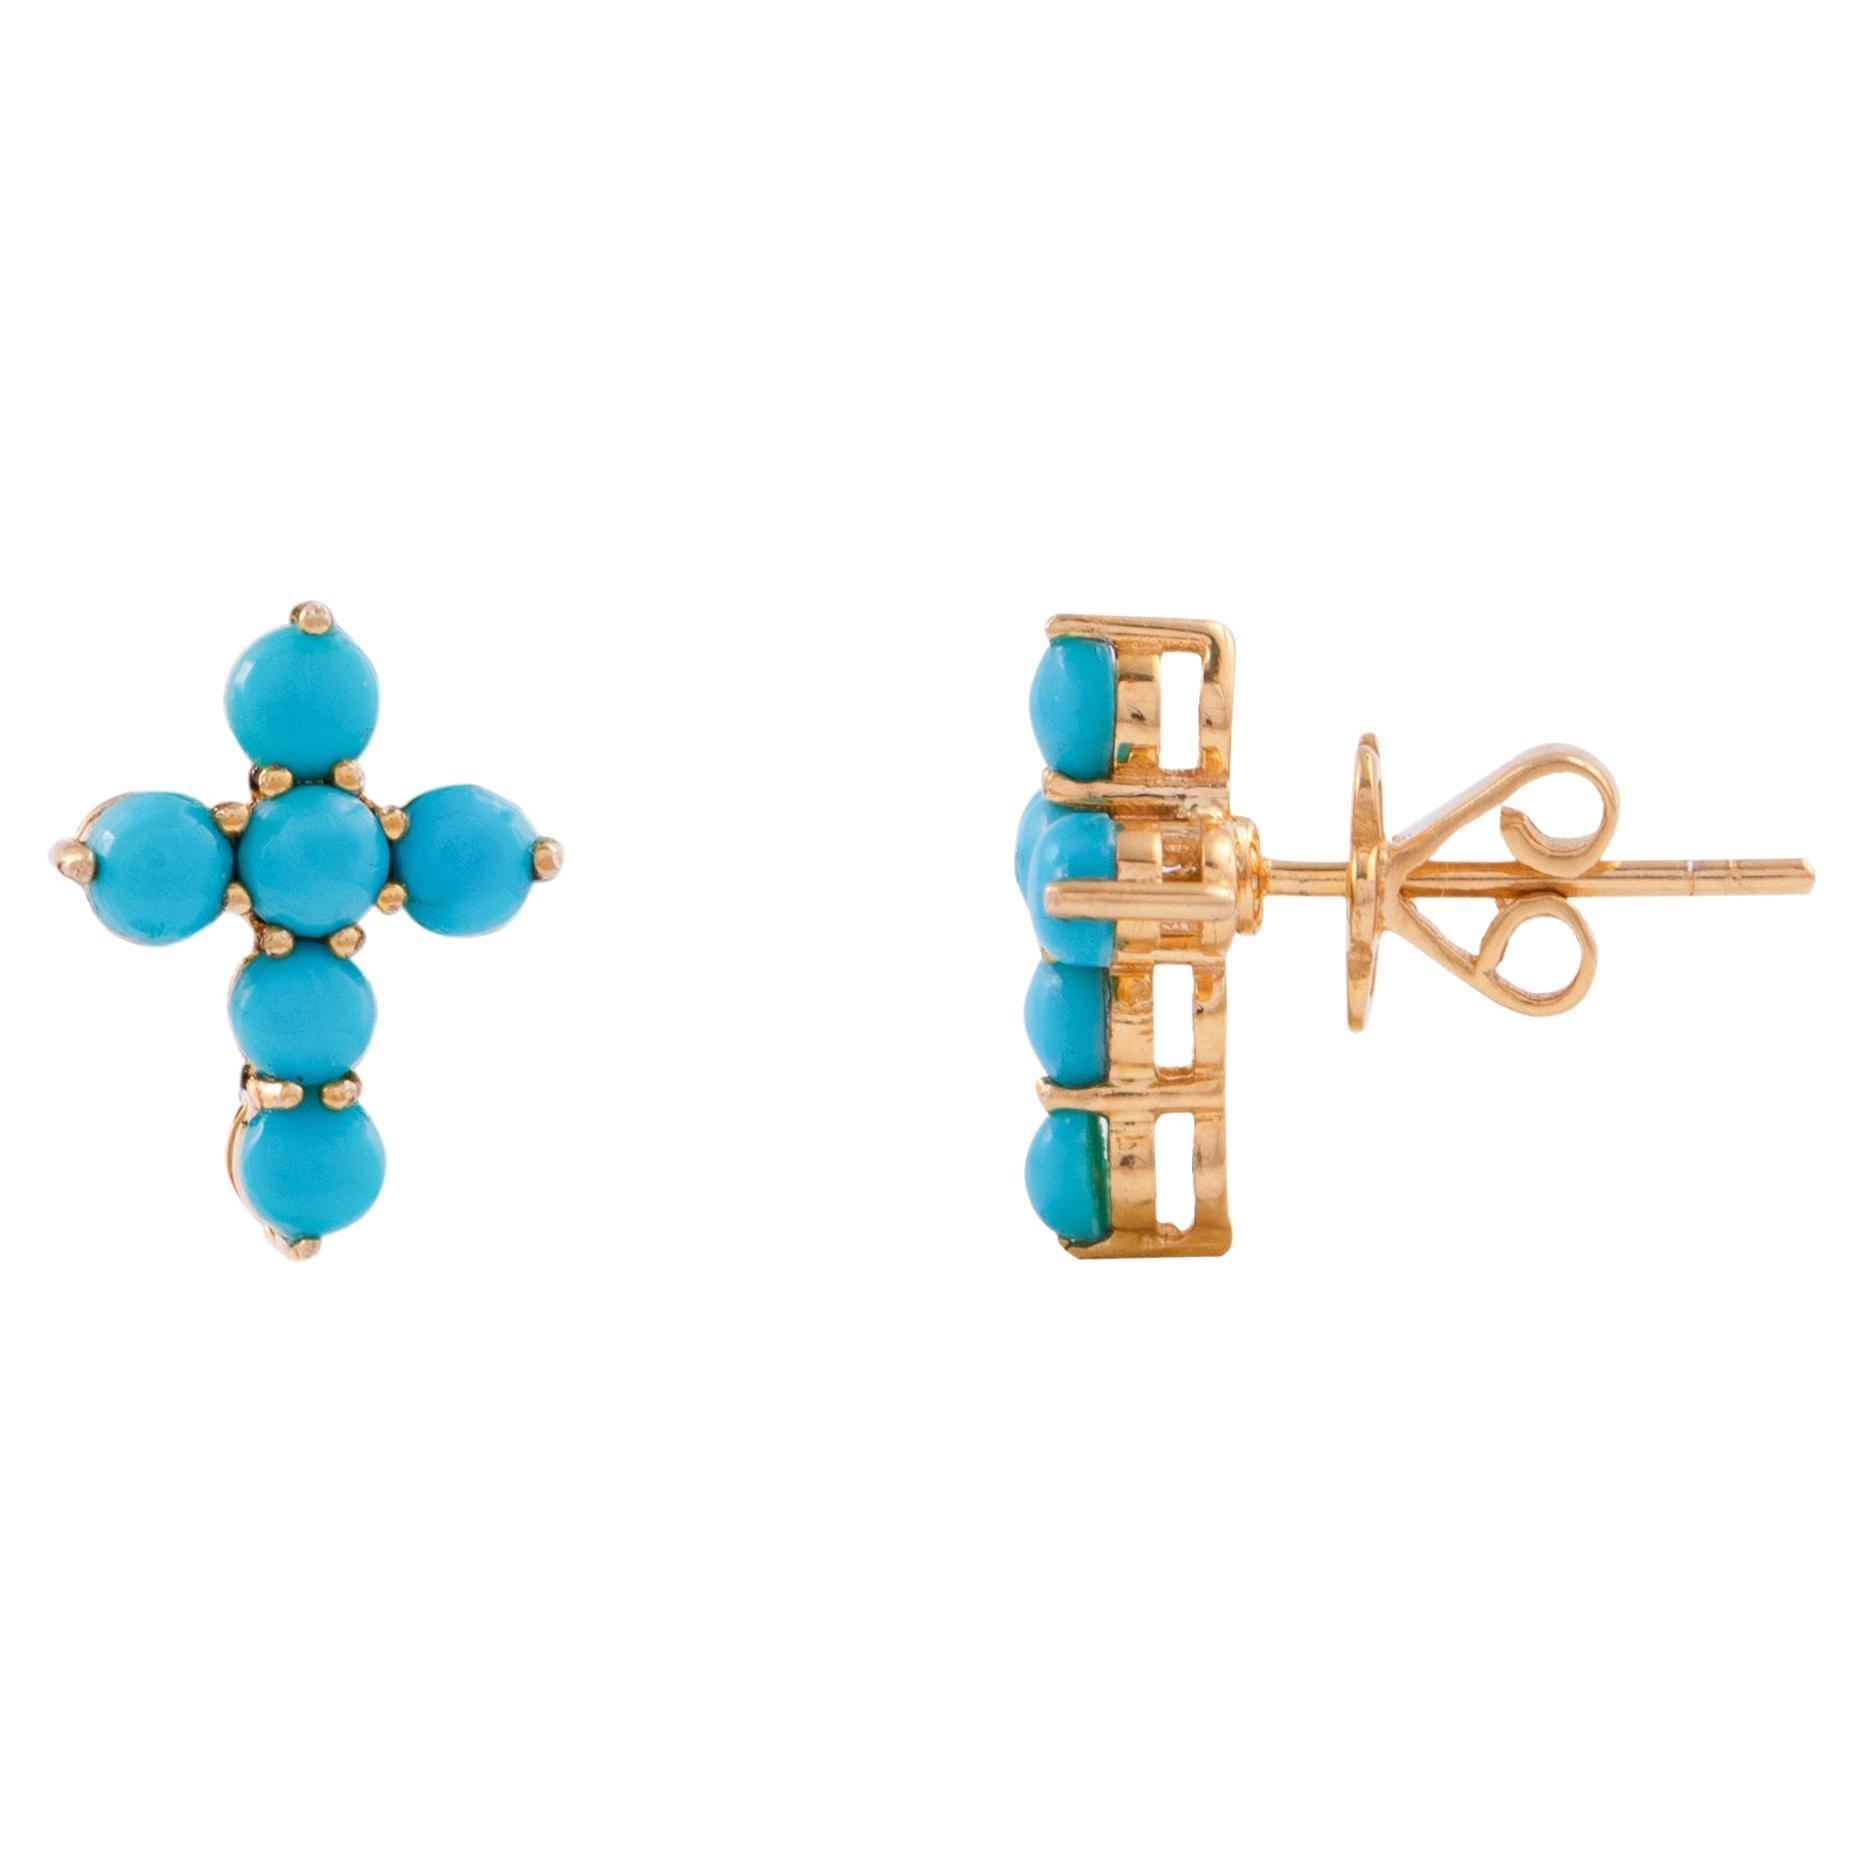 Turquoise Stud Earrings in 14k Gold For Sale